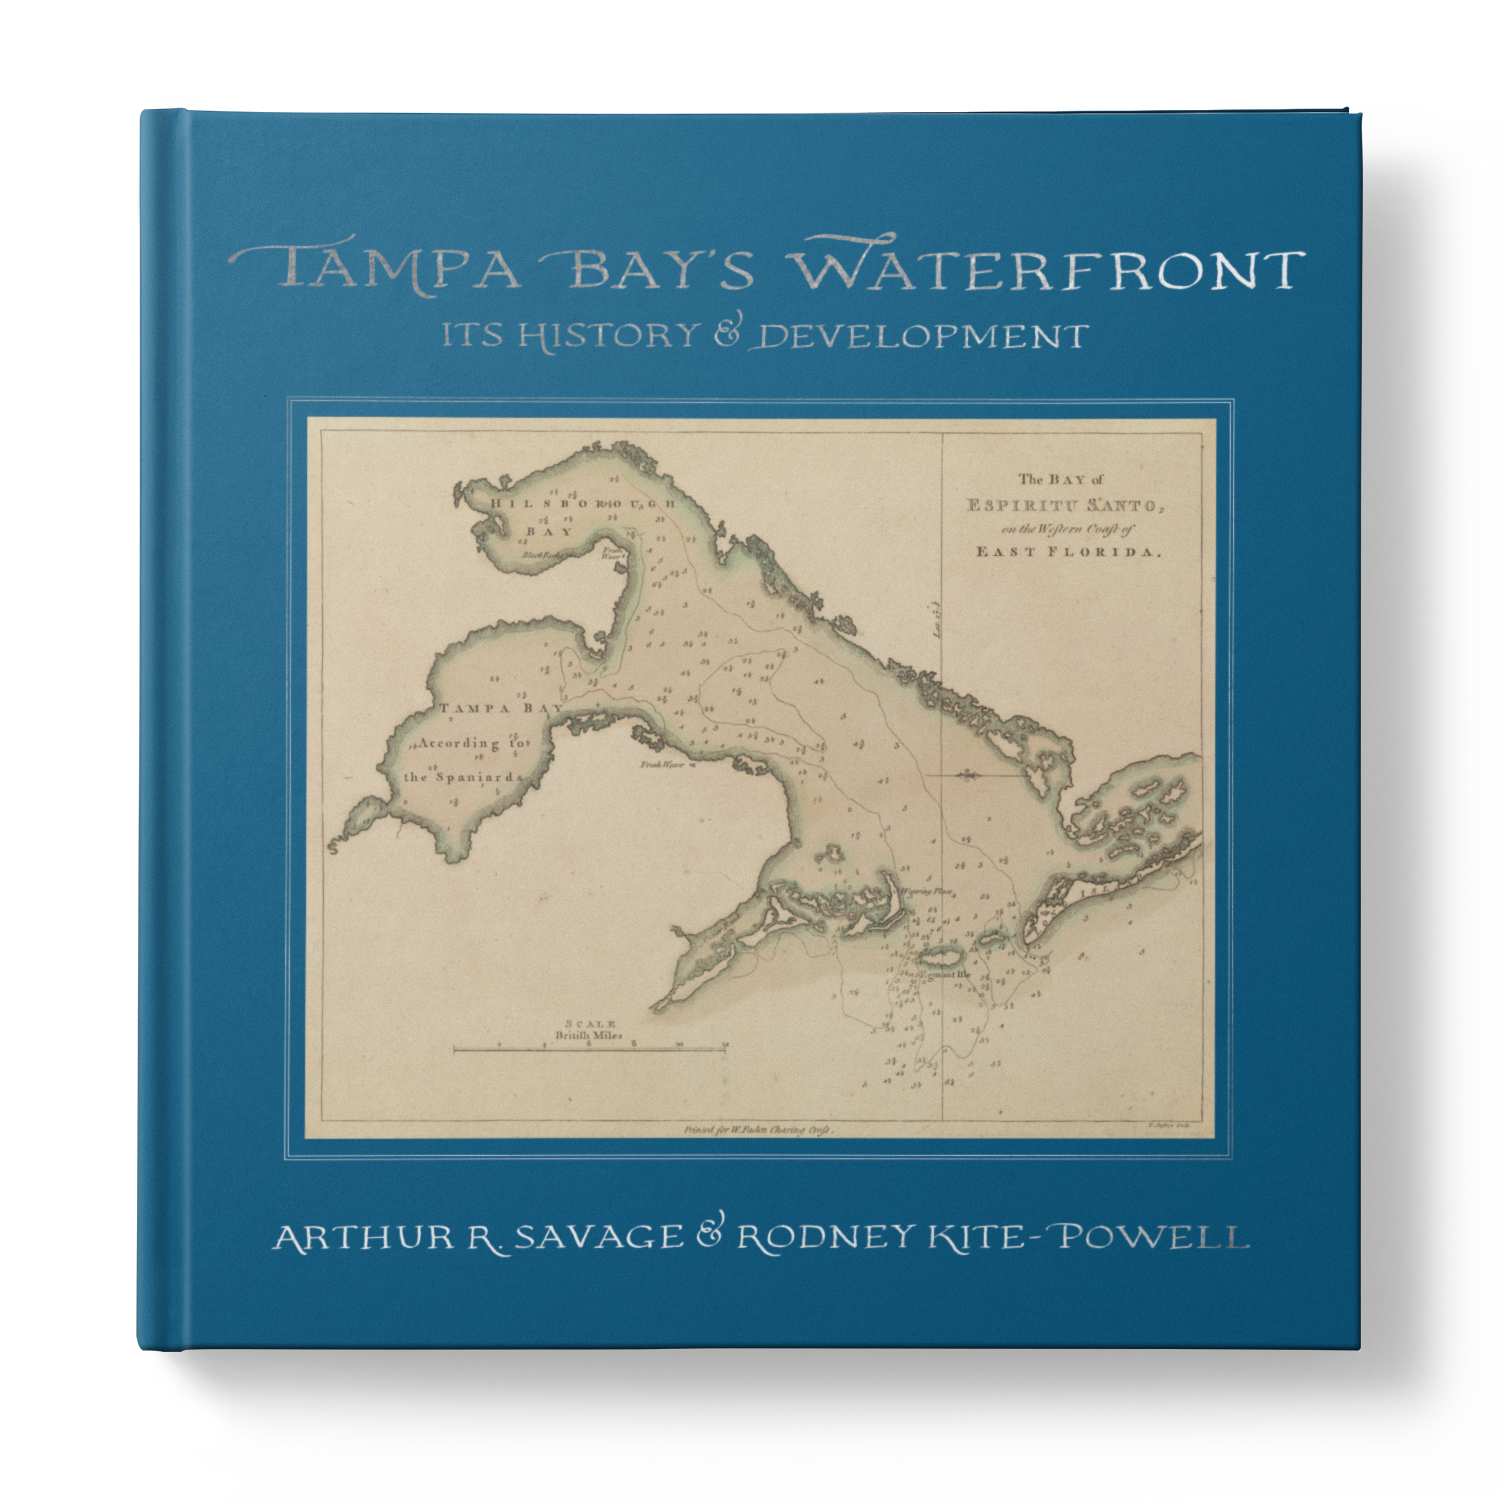 Tampa Bay's Waterfront - Its History & Development